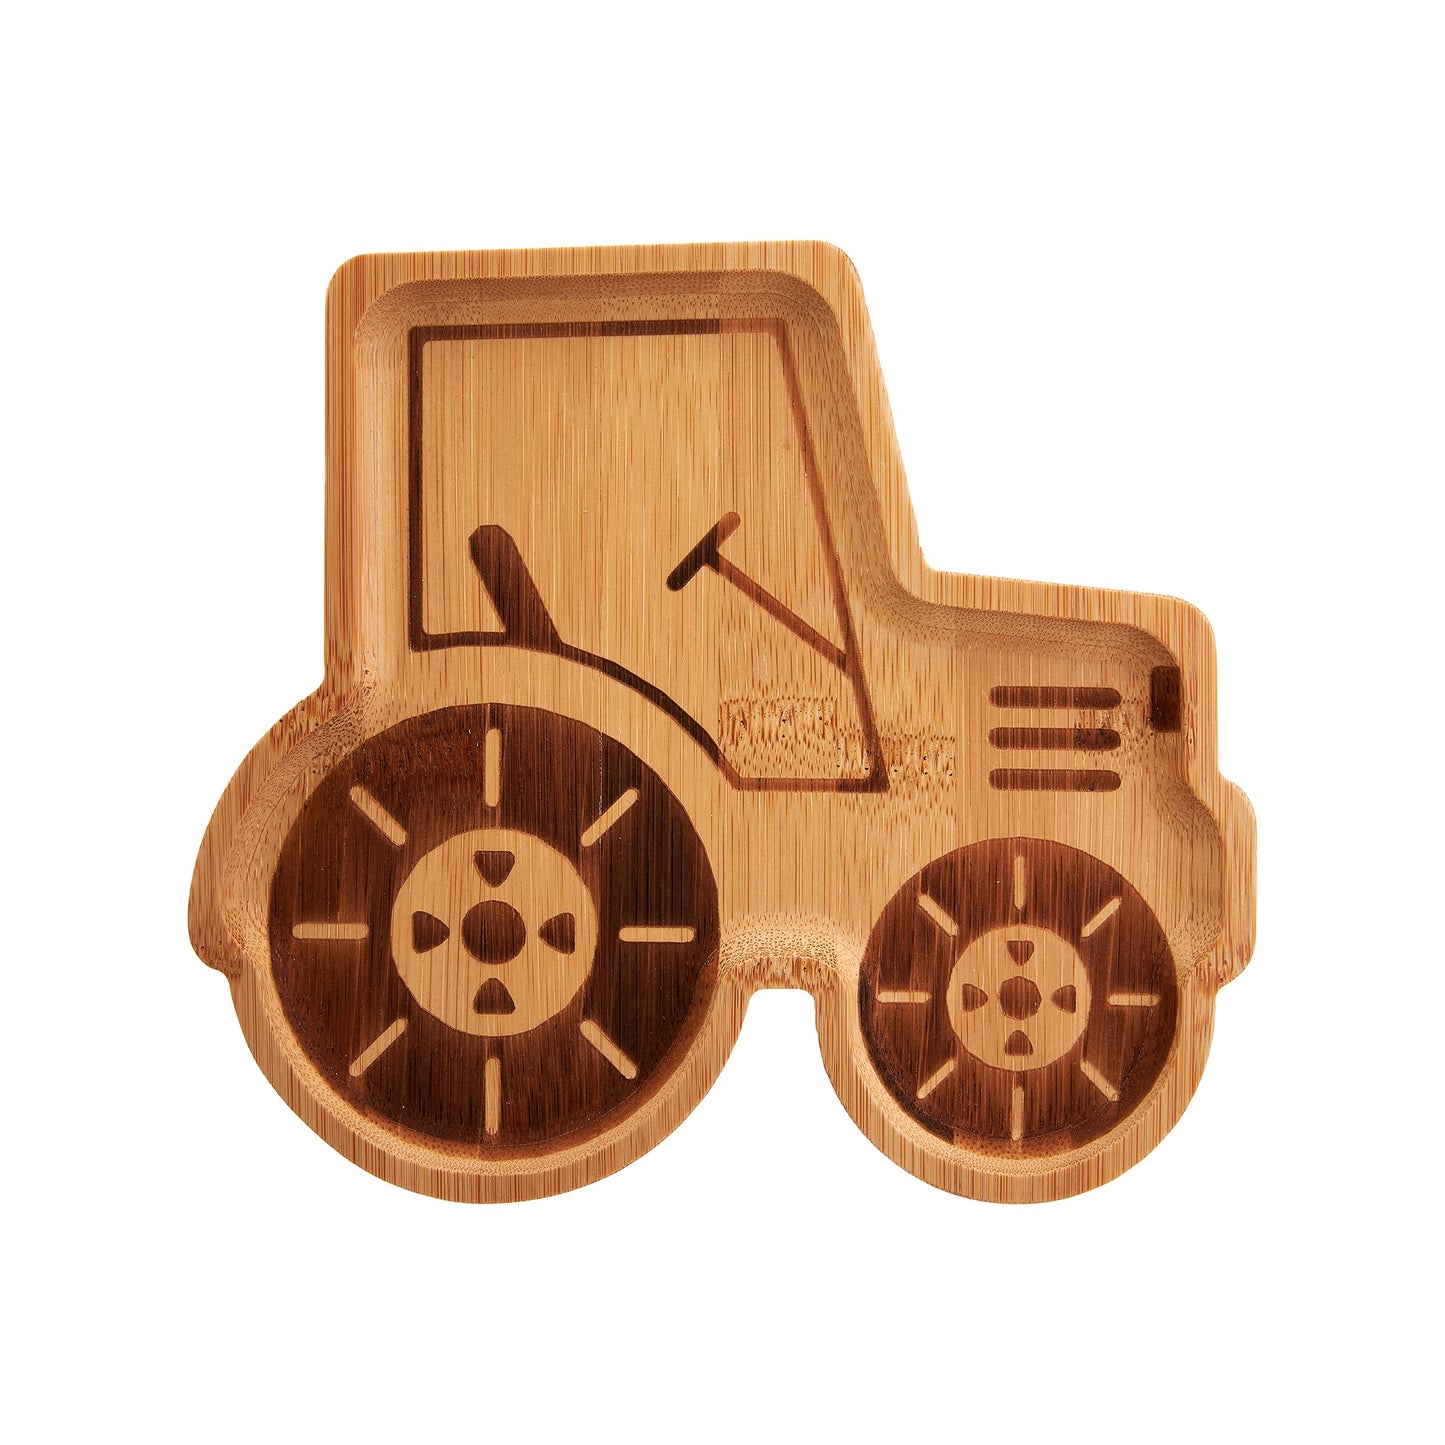 Fun and planet friendly bamboo plate in a tractor design.